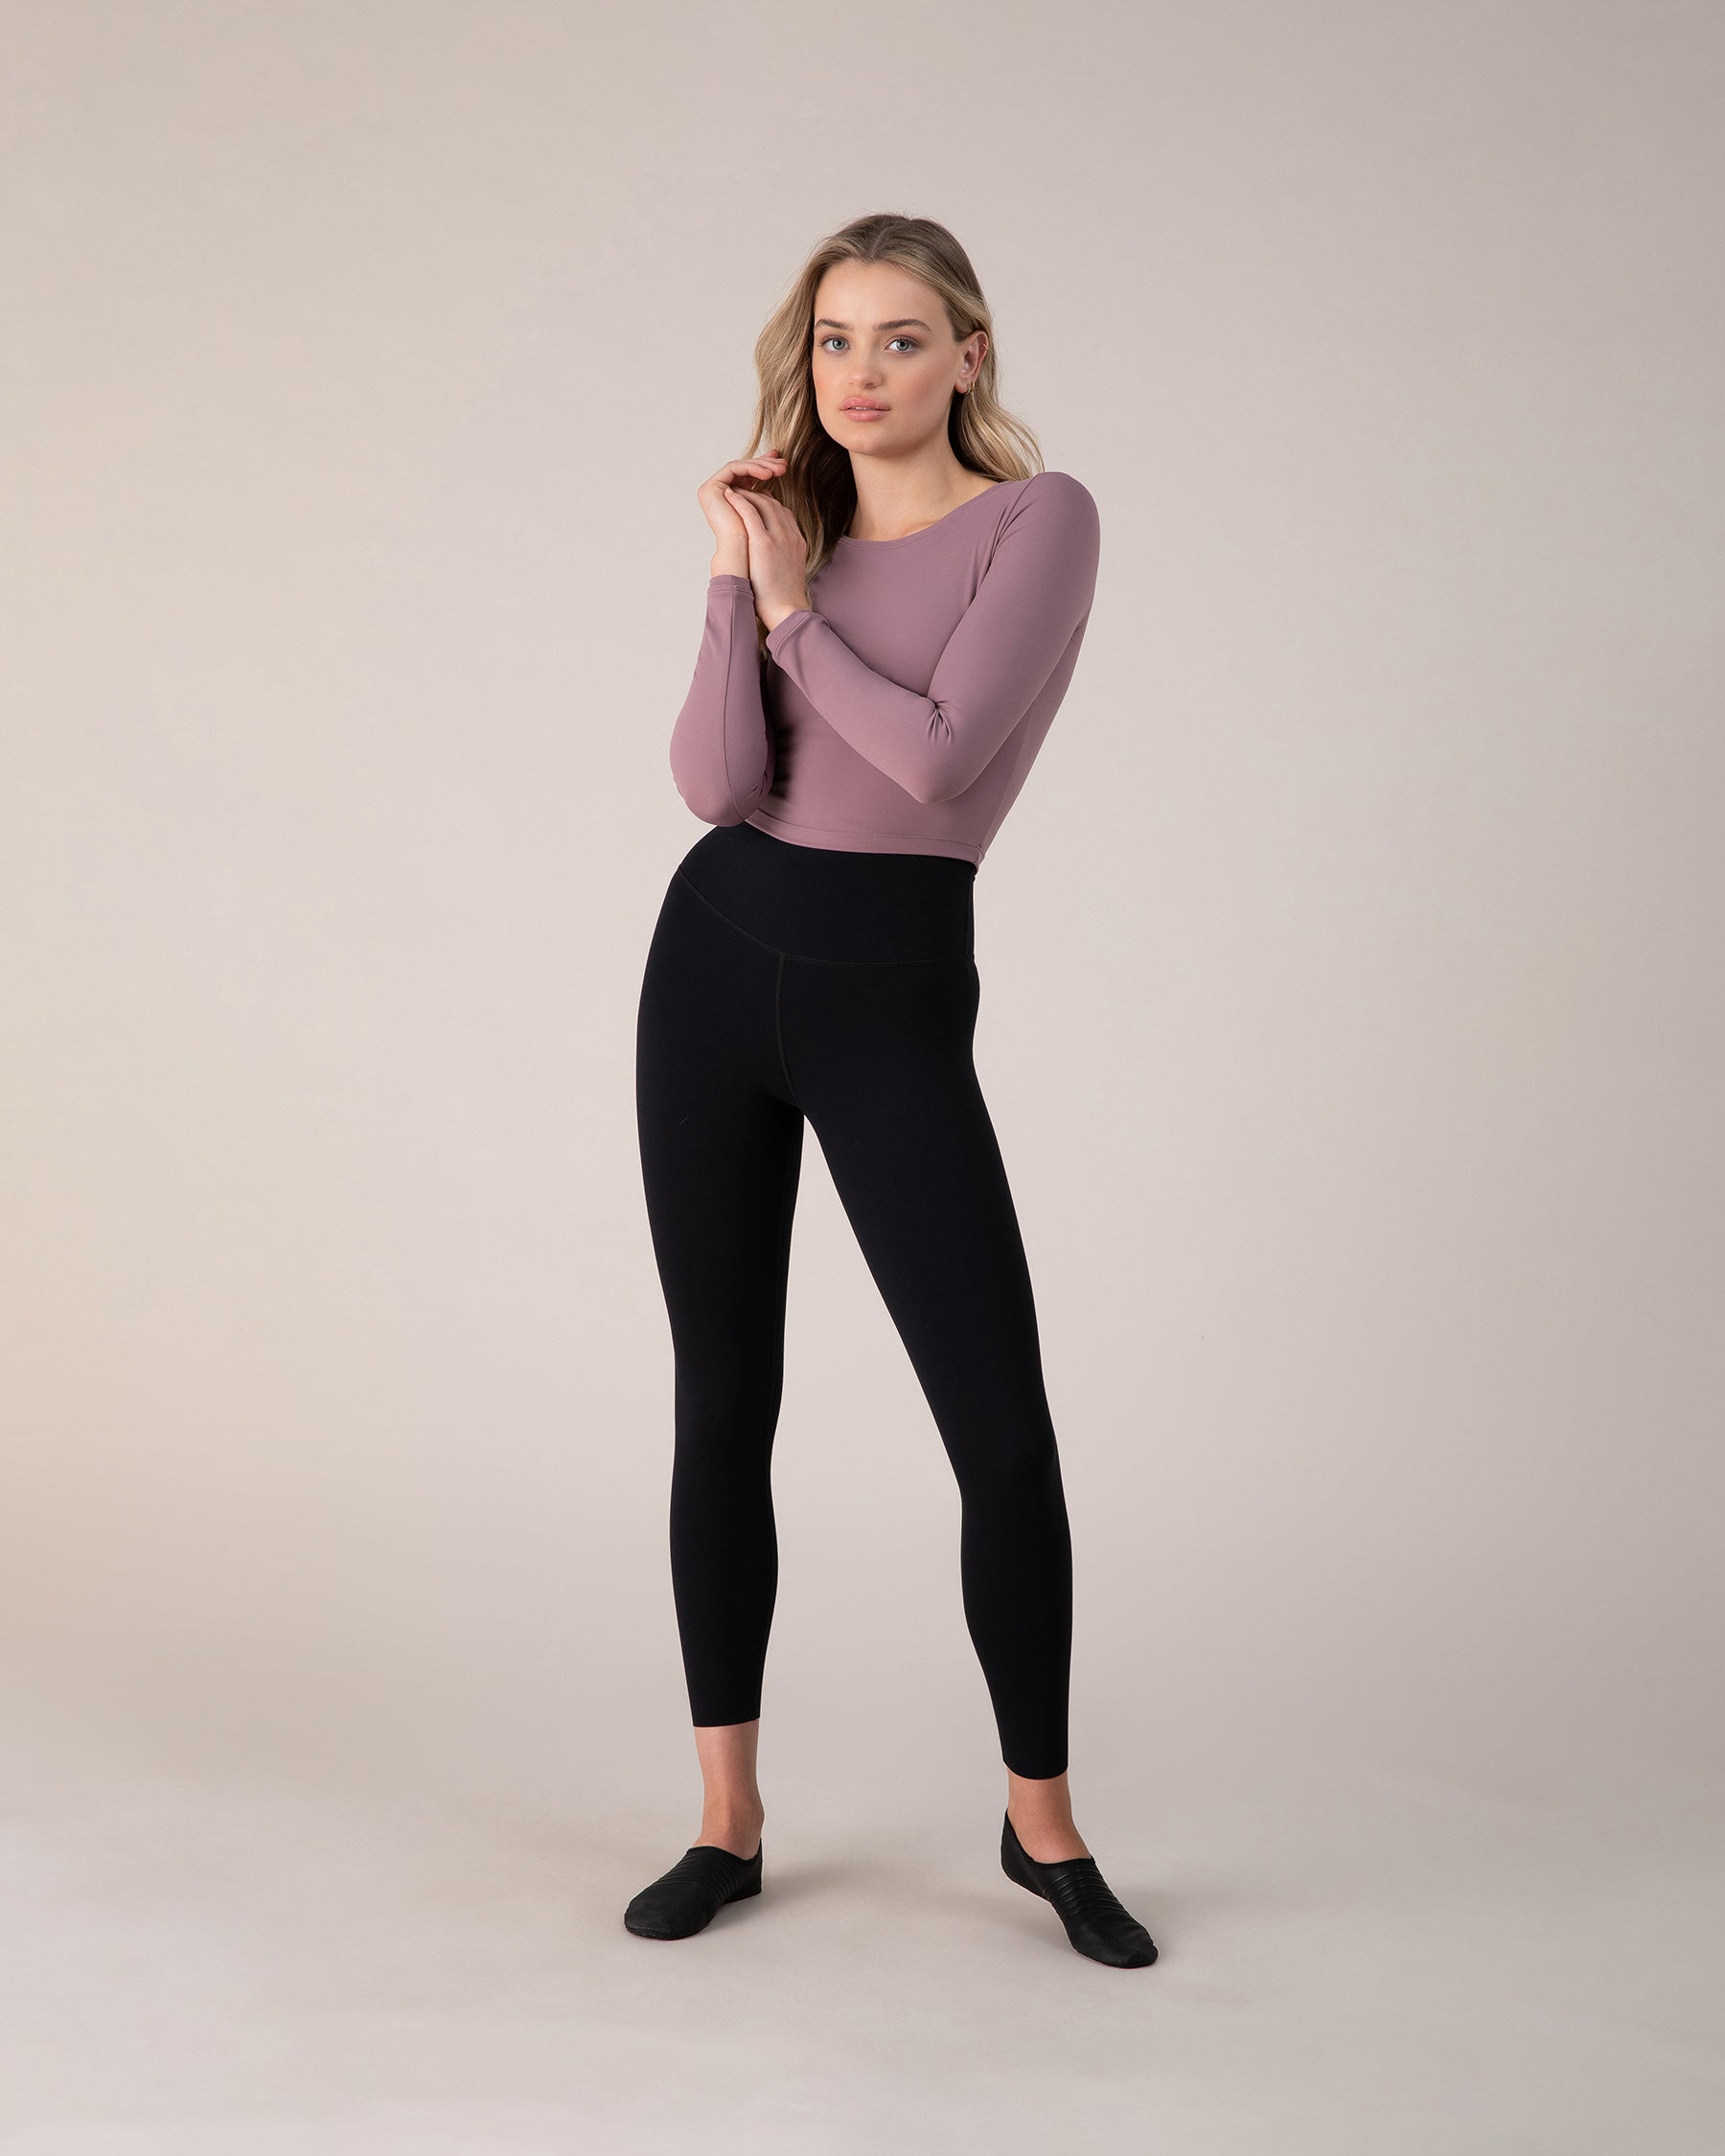 plain black leggings, plain black leggings Suppliers and Manufacturers at  Alibaba.com